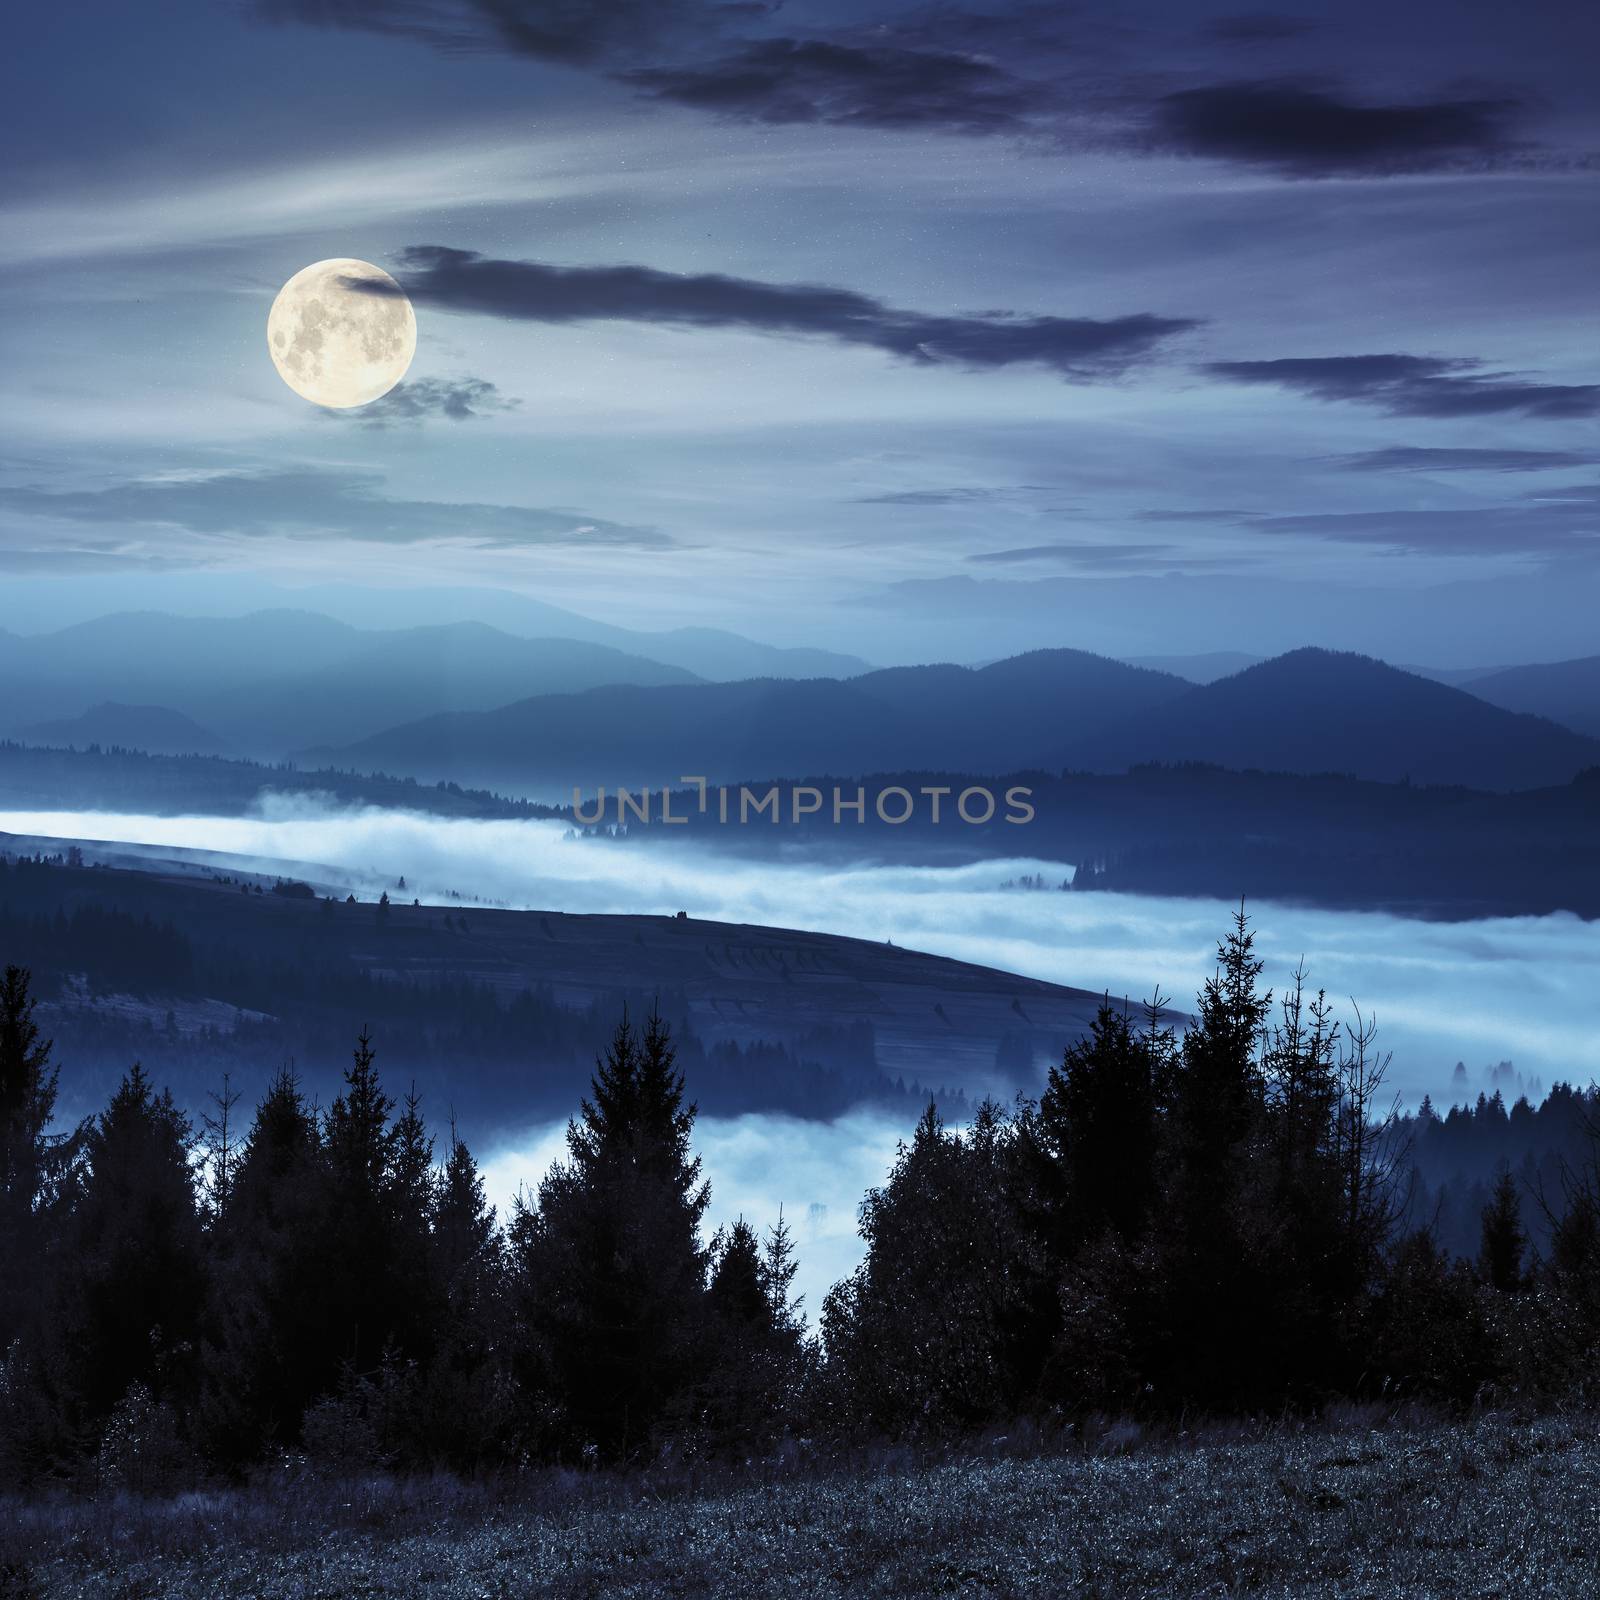 coniferous forest on hillside over foggy valley in autumn mountains at night in full moon light